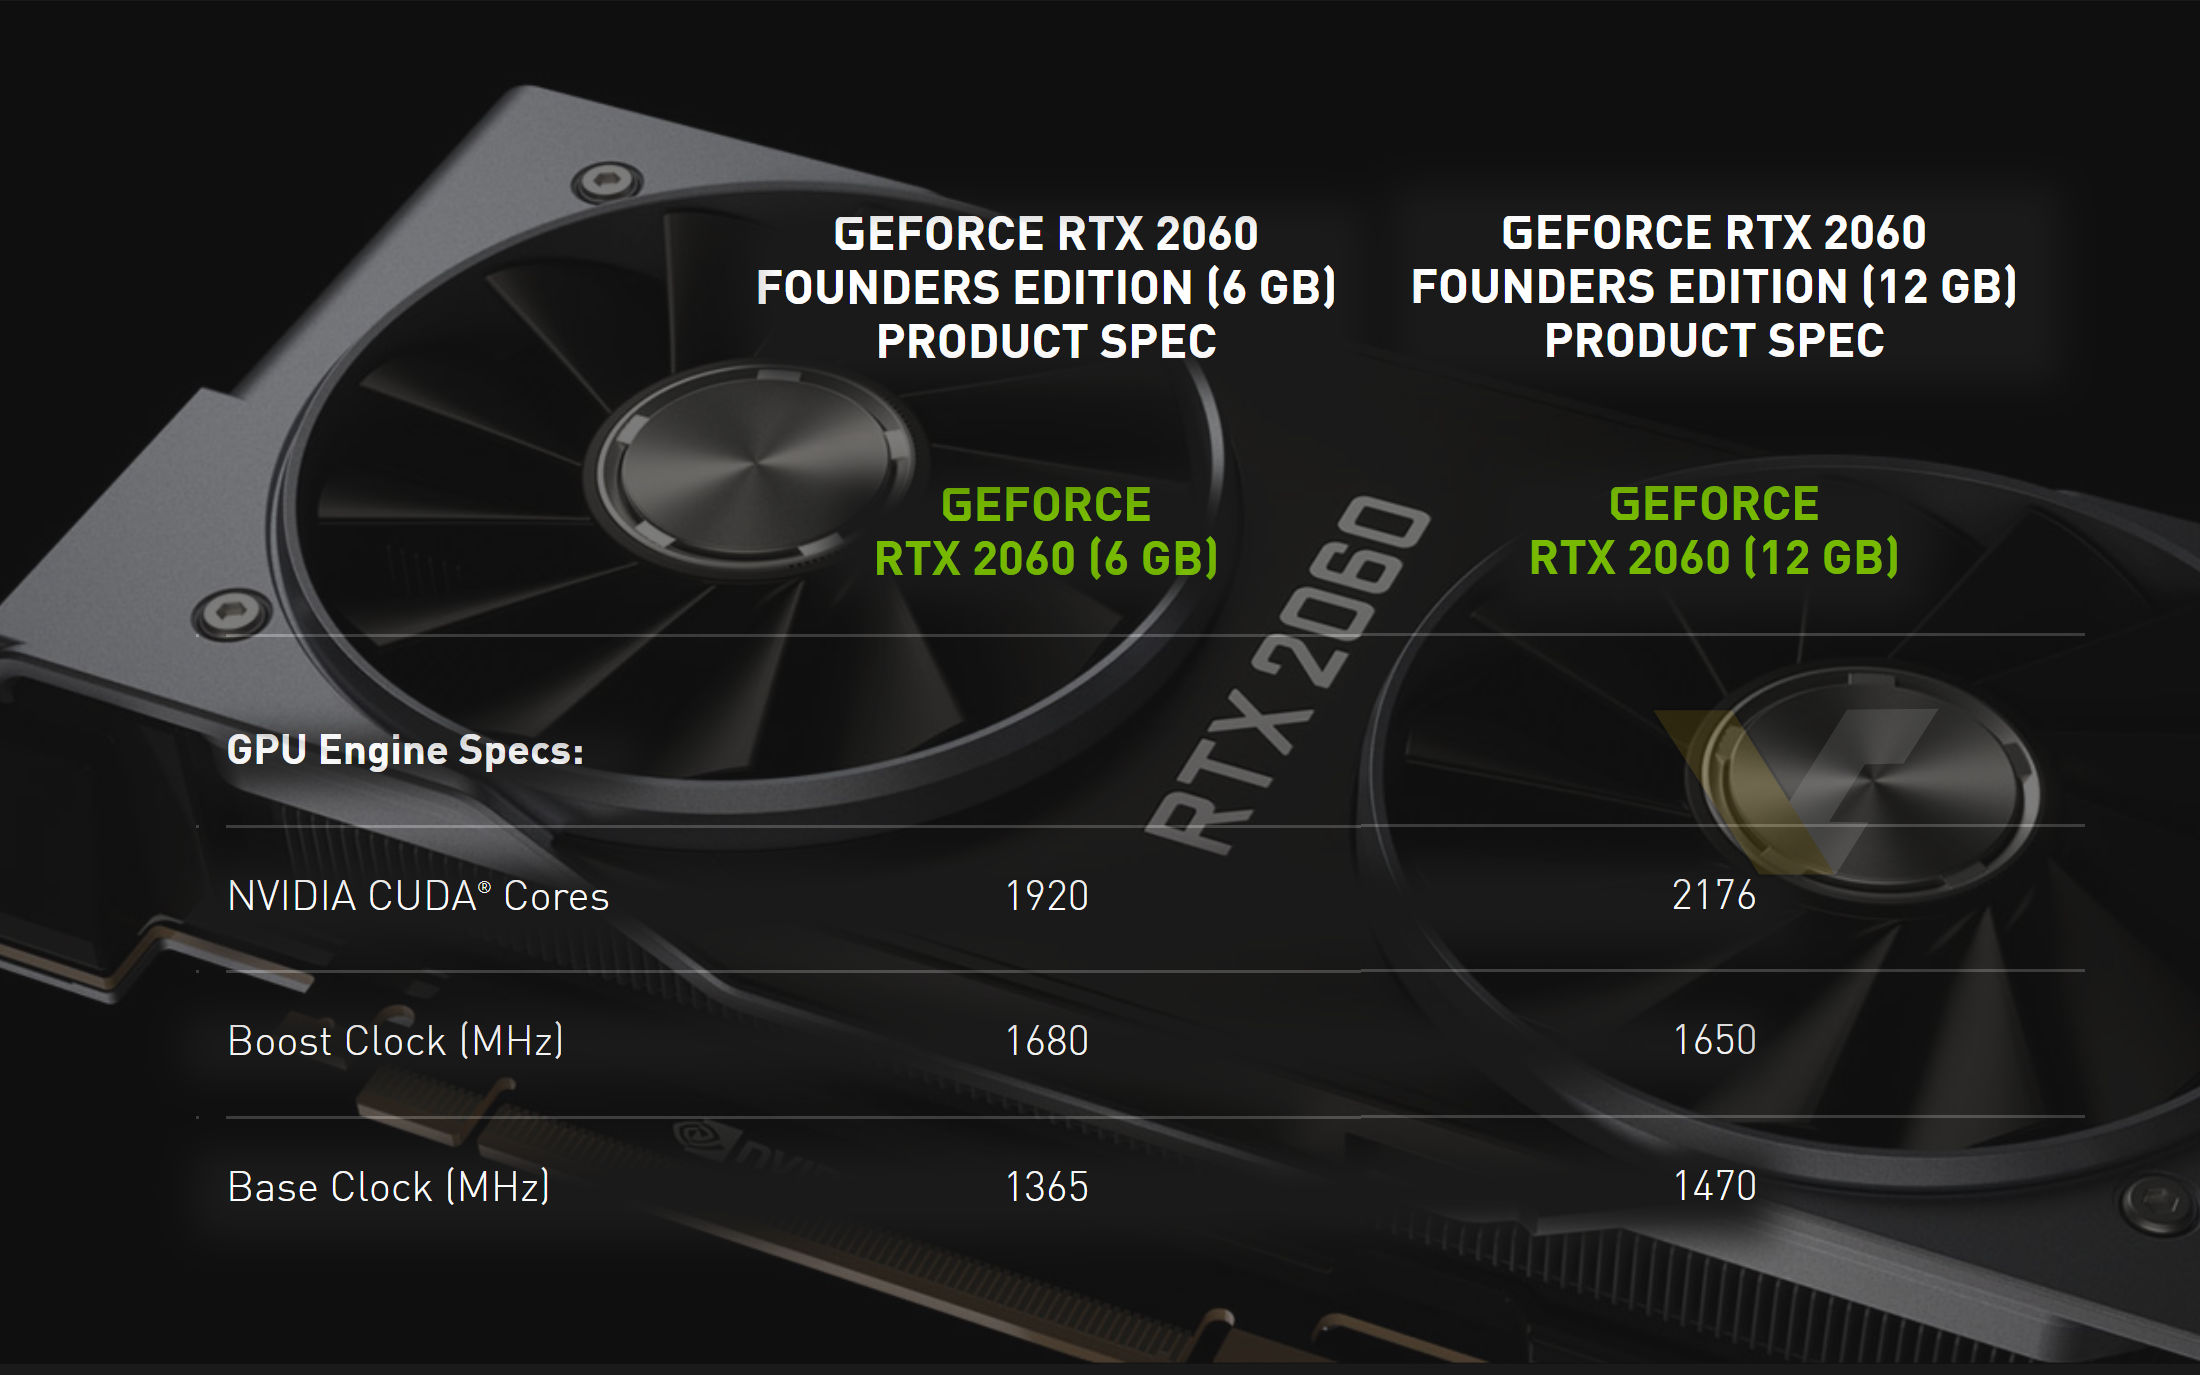 NVIDIA GeForce RTX 2060 12GB official specs are out: 2176 CUDA